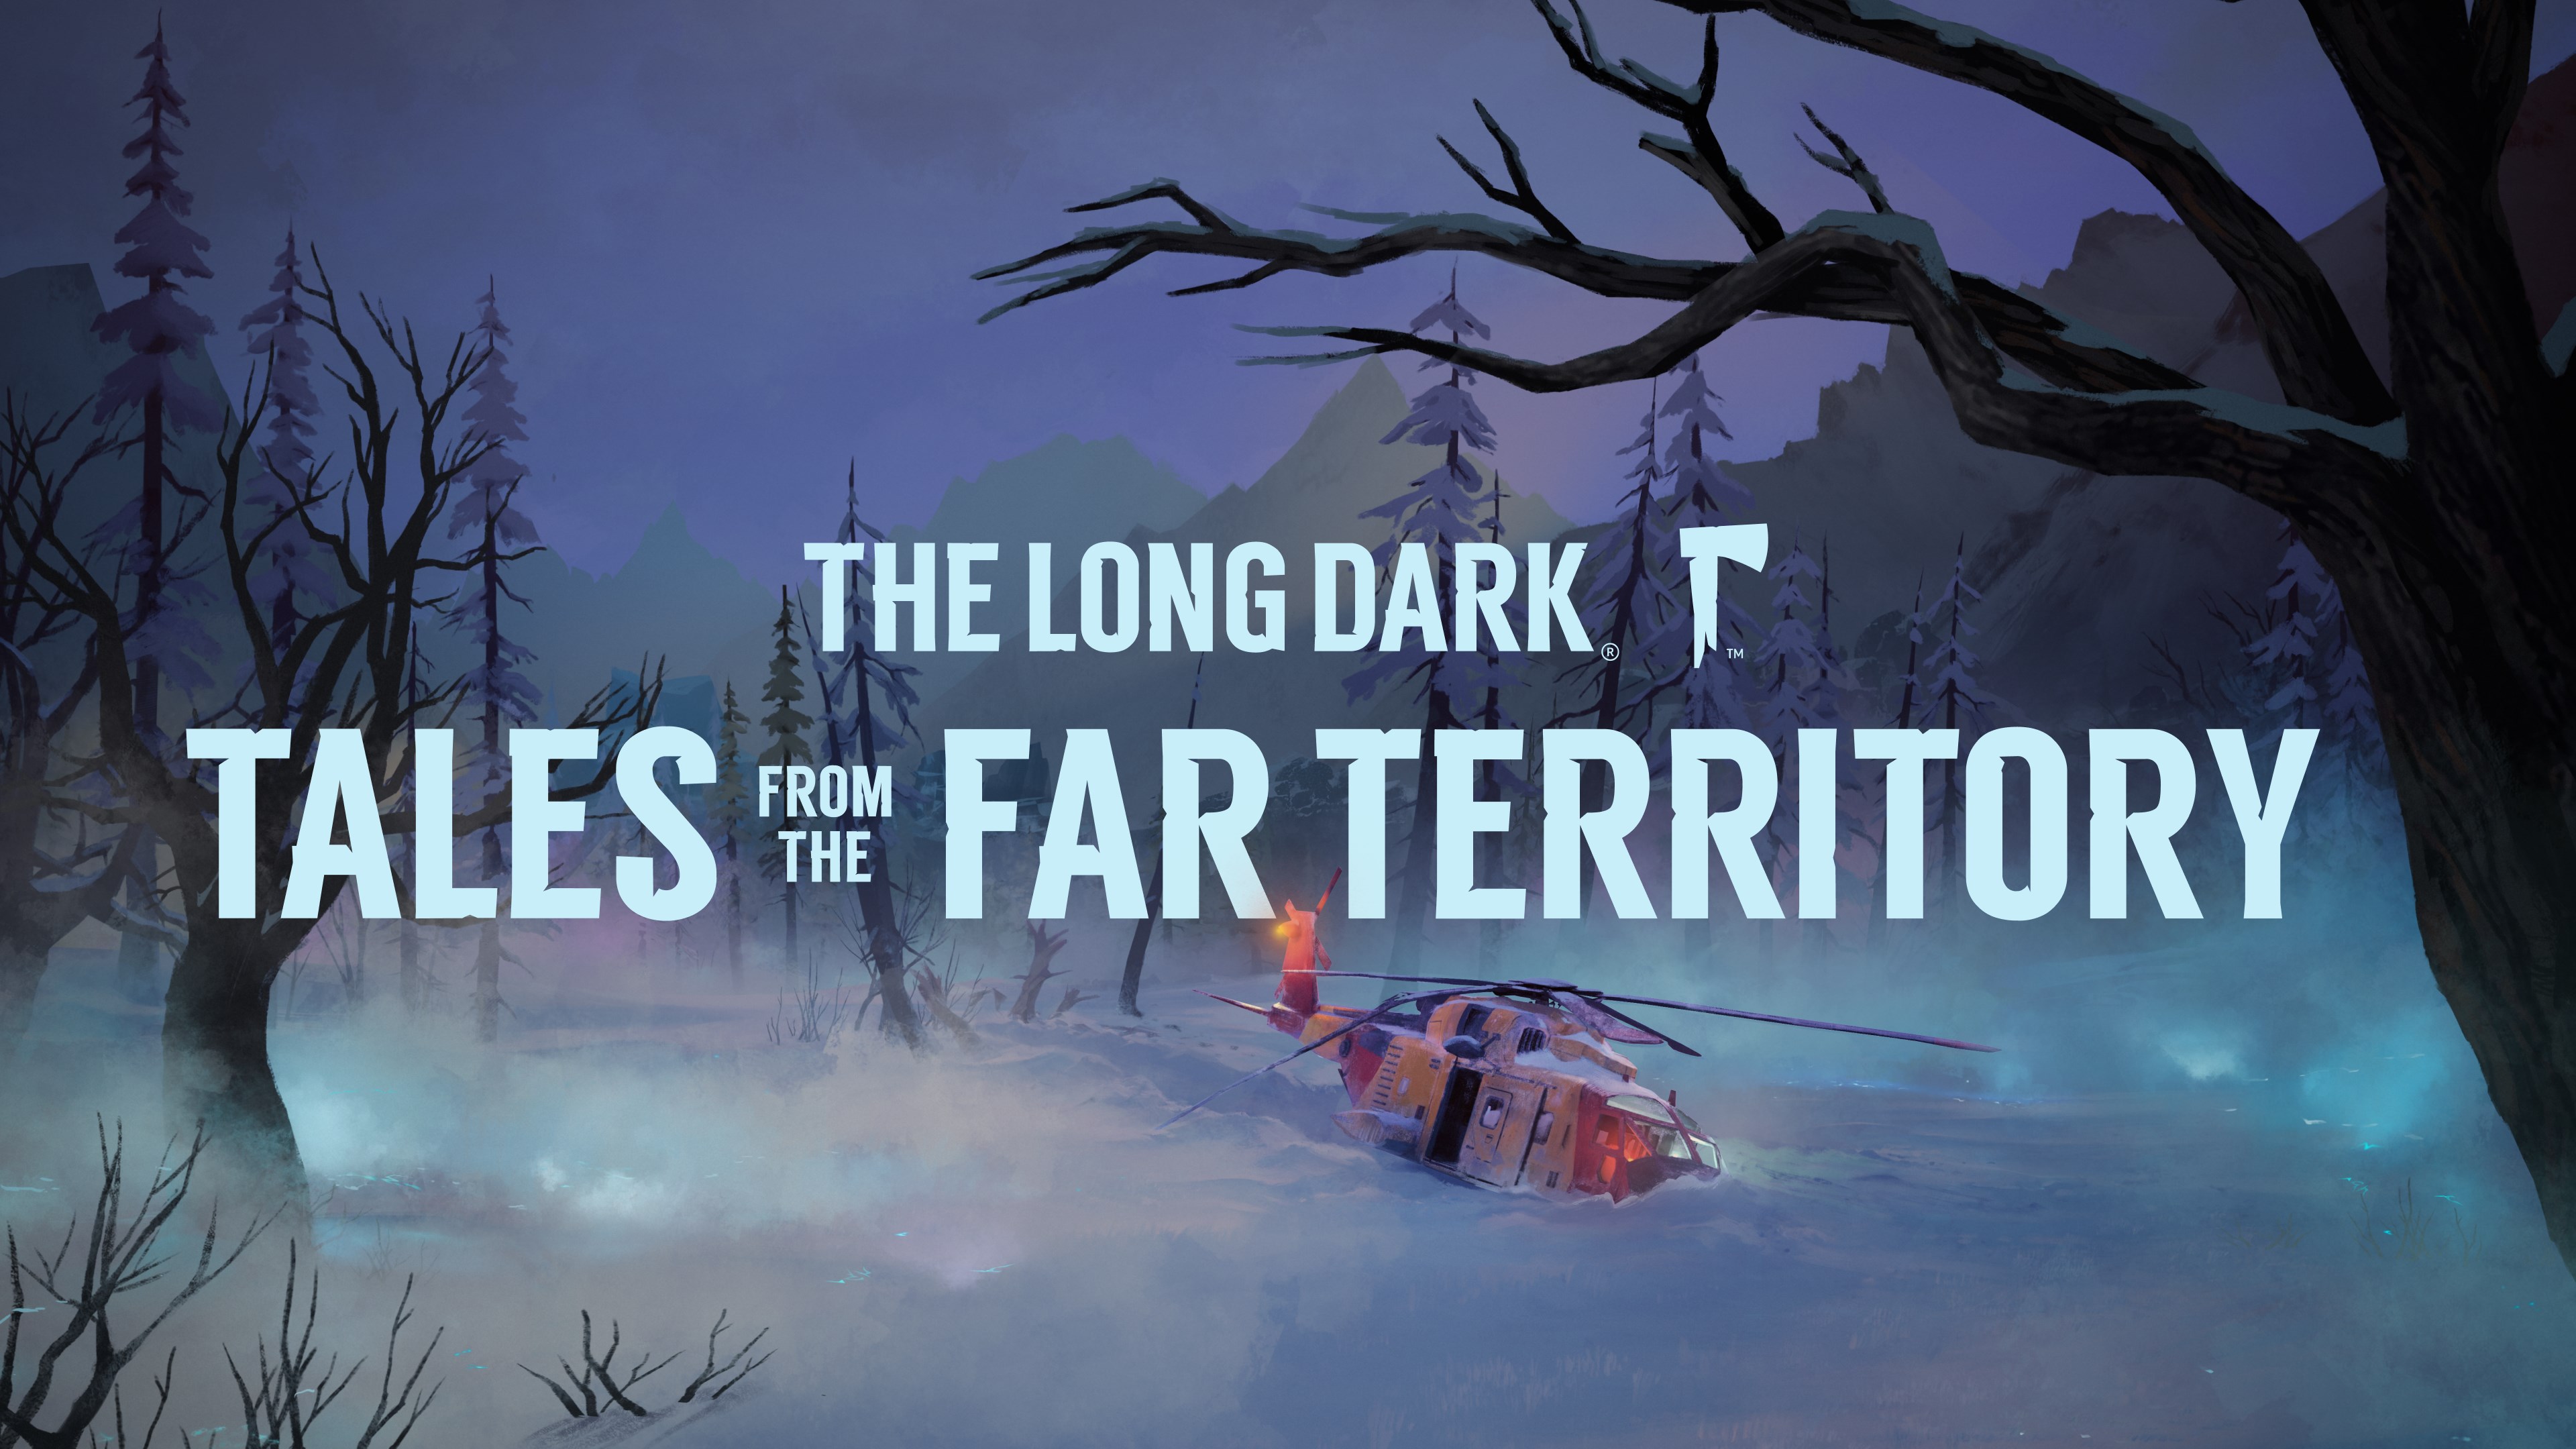 Tales from the far territory. The long Dark. The long Dark Tales from the far Territory карта. The long Dark шапка. The long Dark лето.